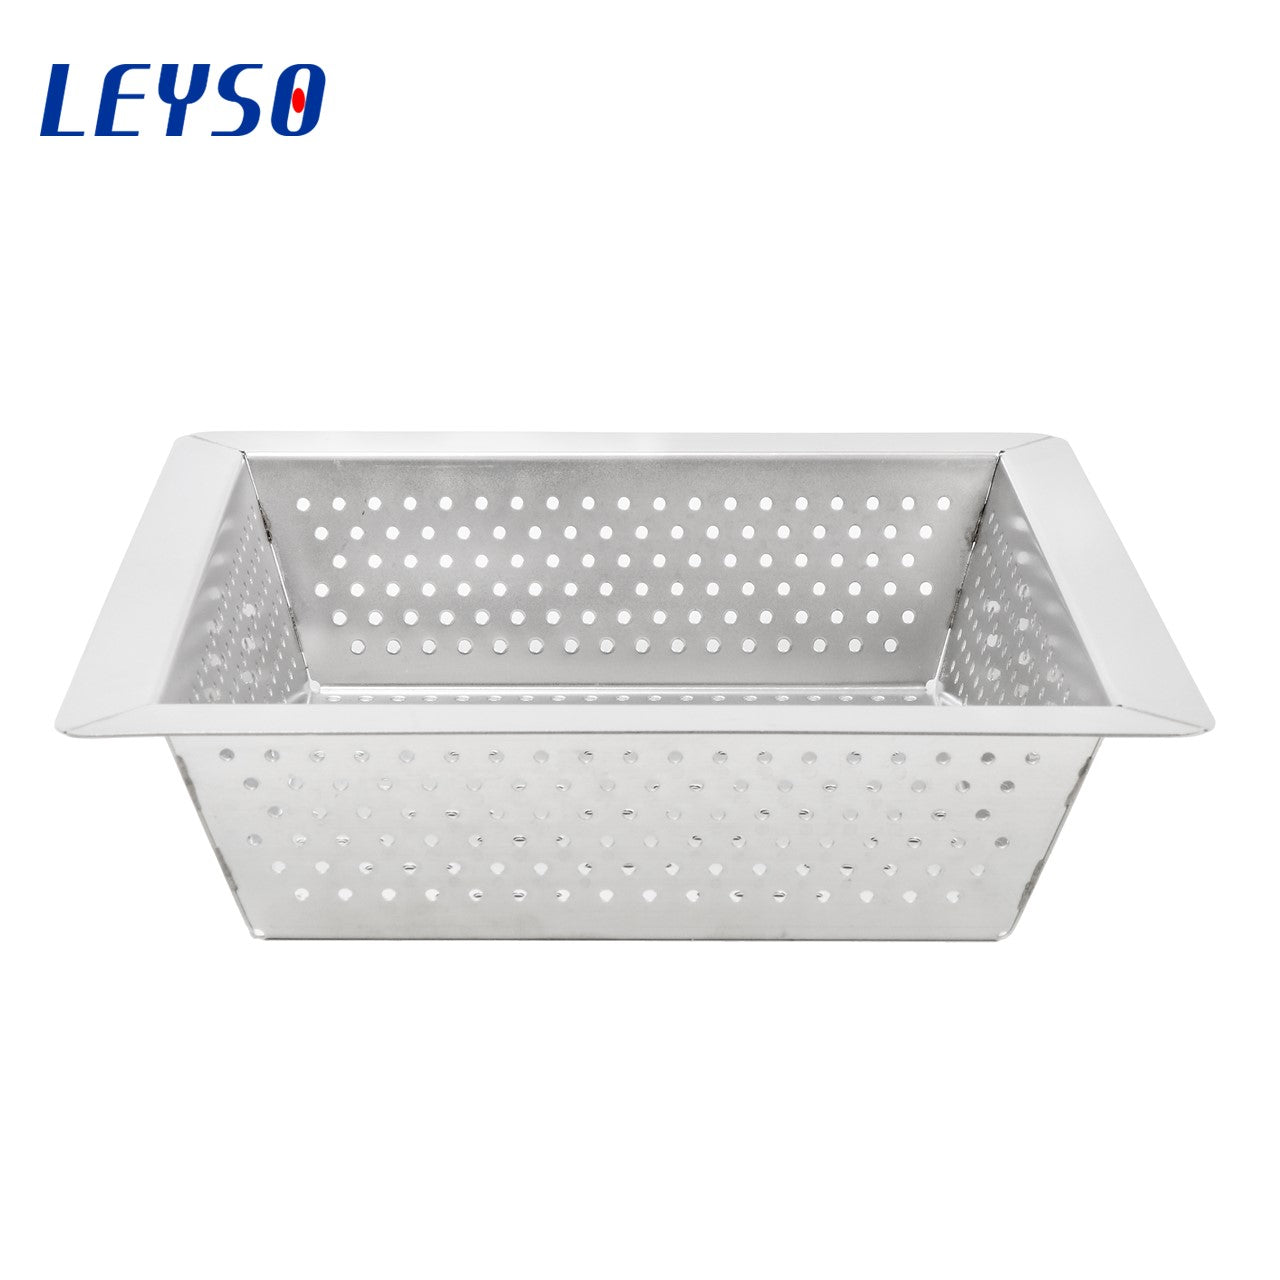 Leyso Stainless Steel Floor Sink Top Hang Basket Strainer Sink Drain Cover 10” x 10” x 2-1/2” for Kitchen, Restaurant, Bar, Buffet